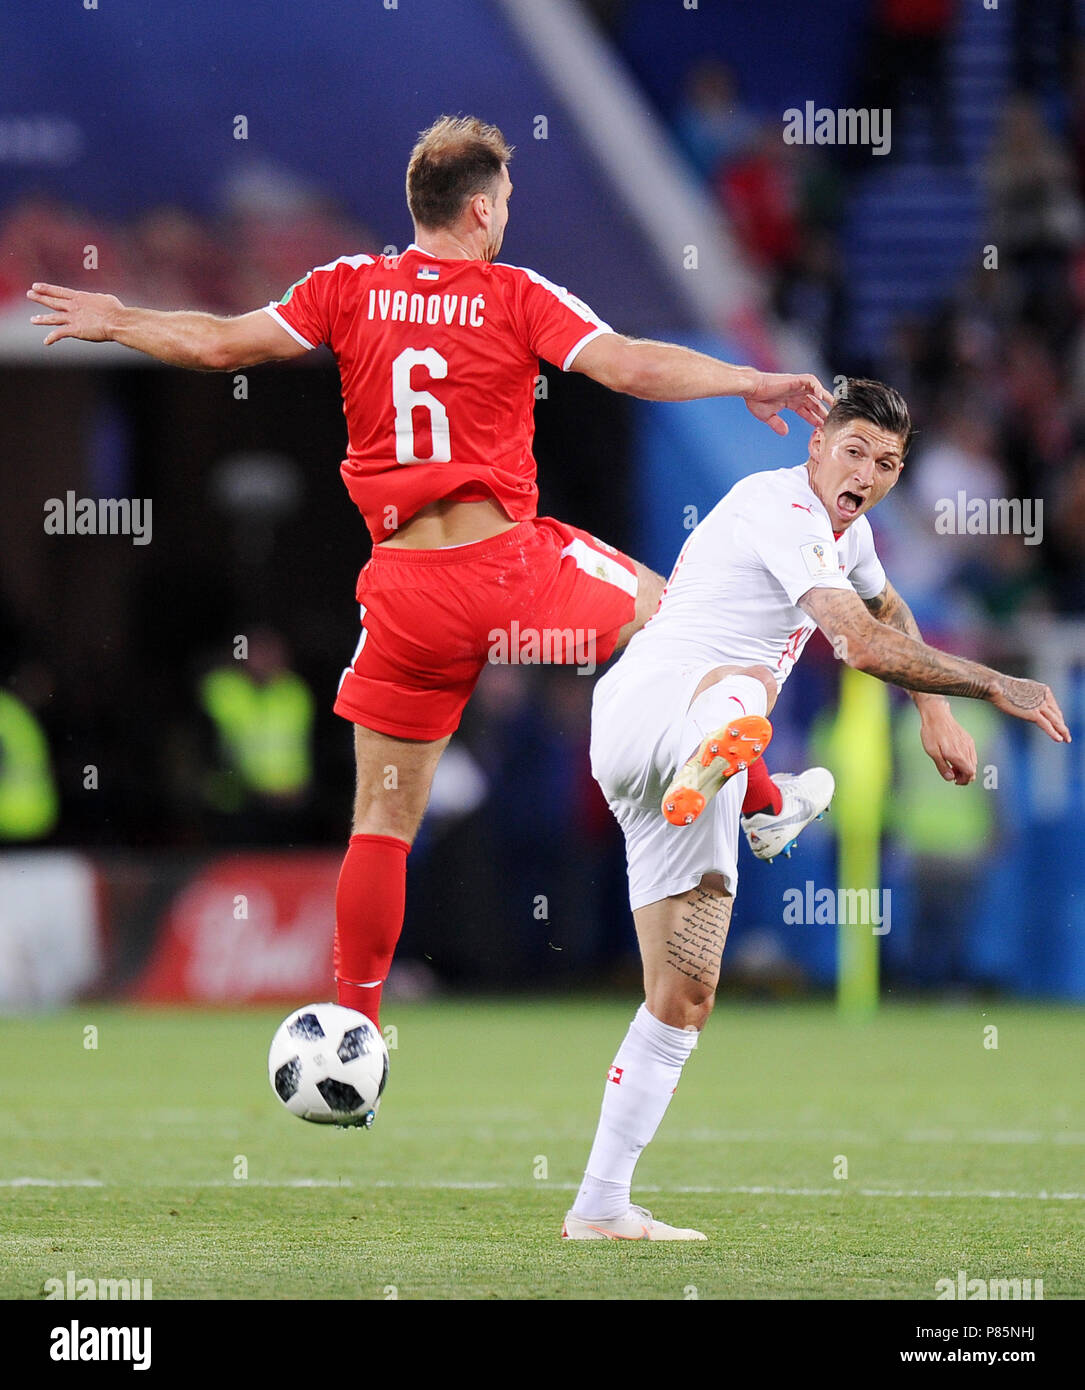 KALININGRAD, RUSSIA - JUNE 22: Branislav Ivanovic of Serbia competes with Steven Zuber of Switzerland during the 2018 FIFA World Cup Russia group E match between Serbia and Switzerland at Kaliningrad Stadium on June 22, 2018 in Kaliningrad, Russia. (Photo by Norbert Barczyk/PressFocus/MB Media) Stock Photo